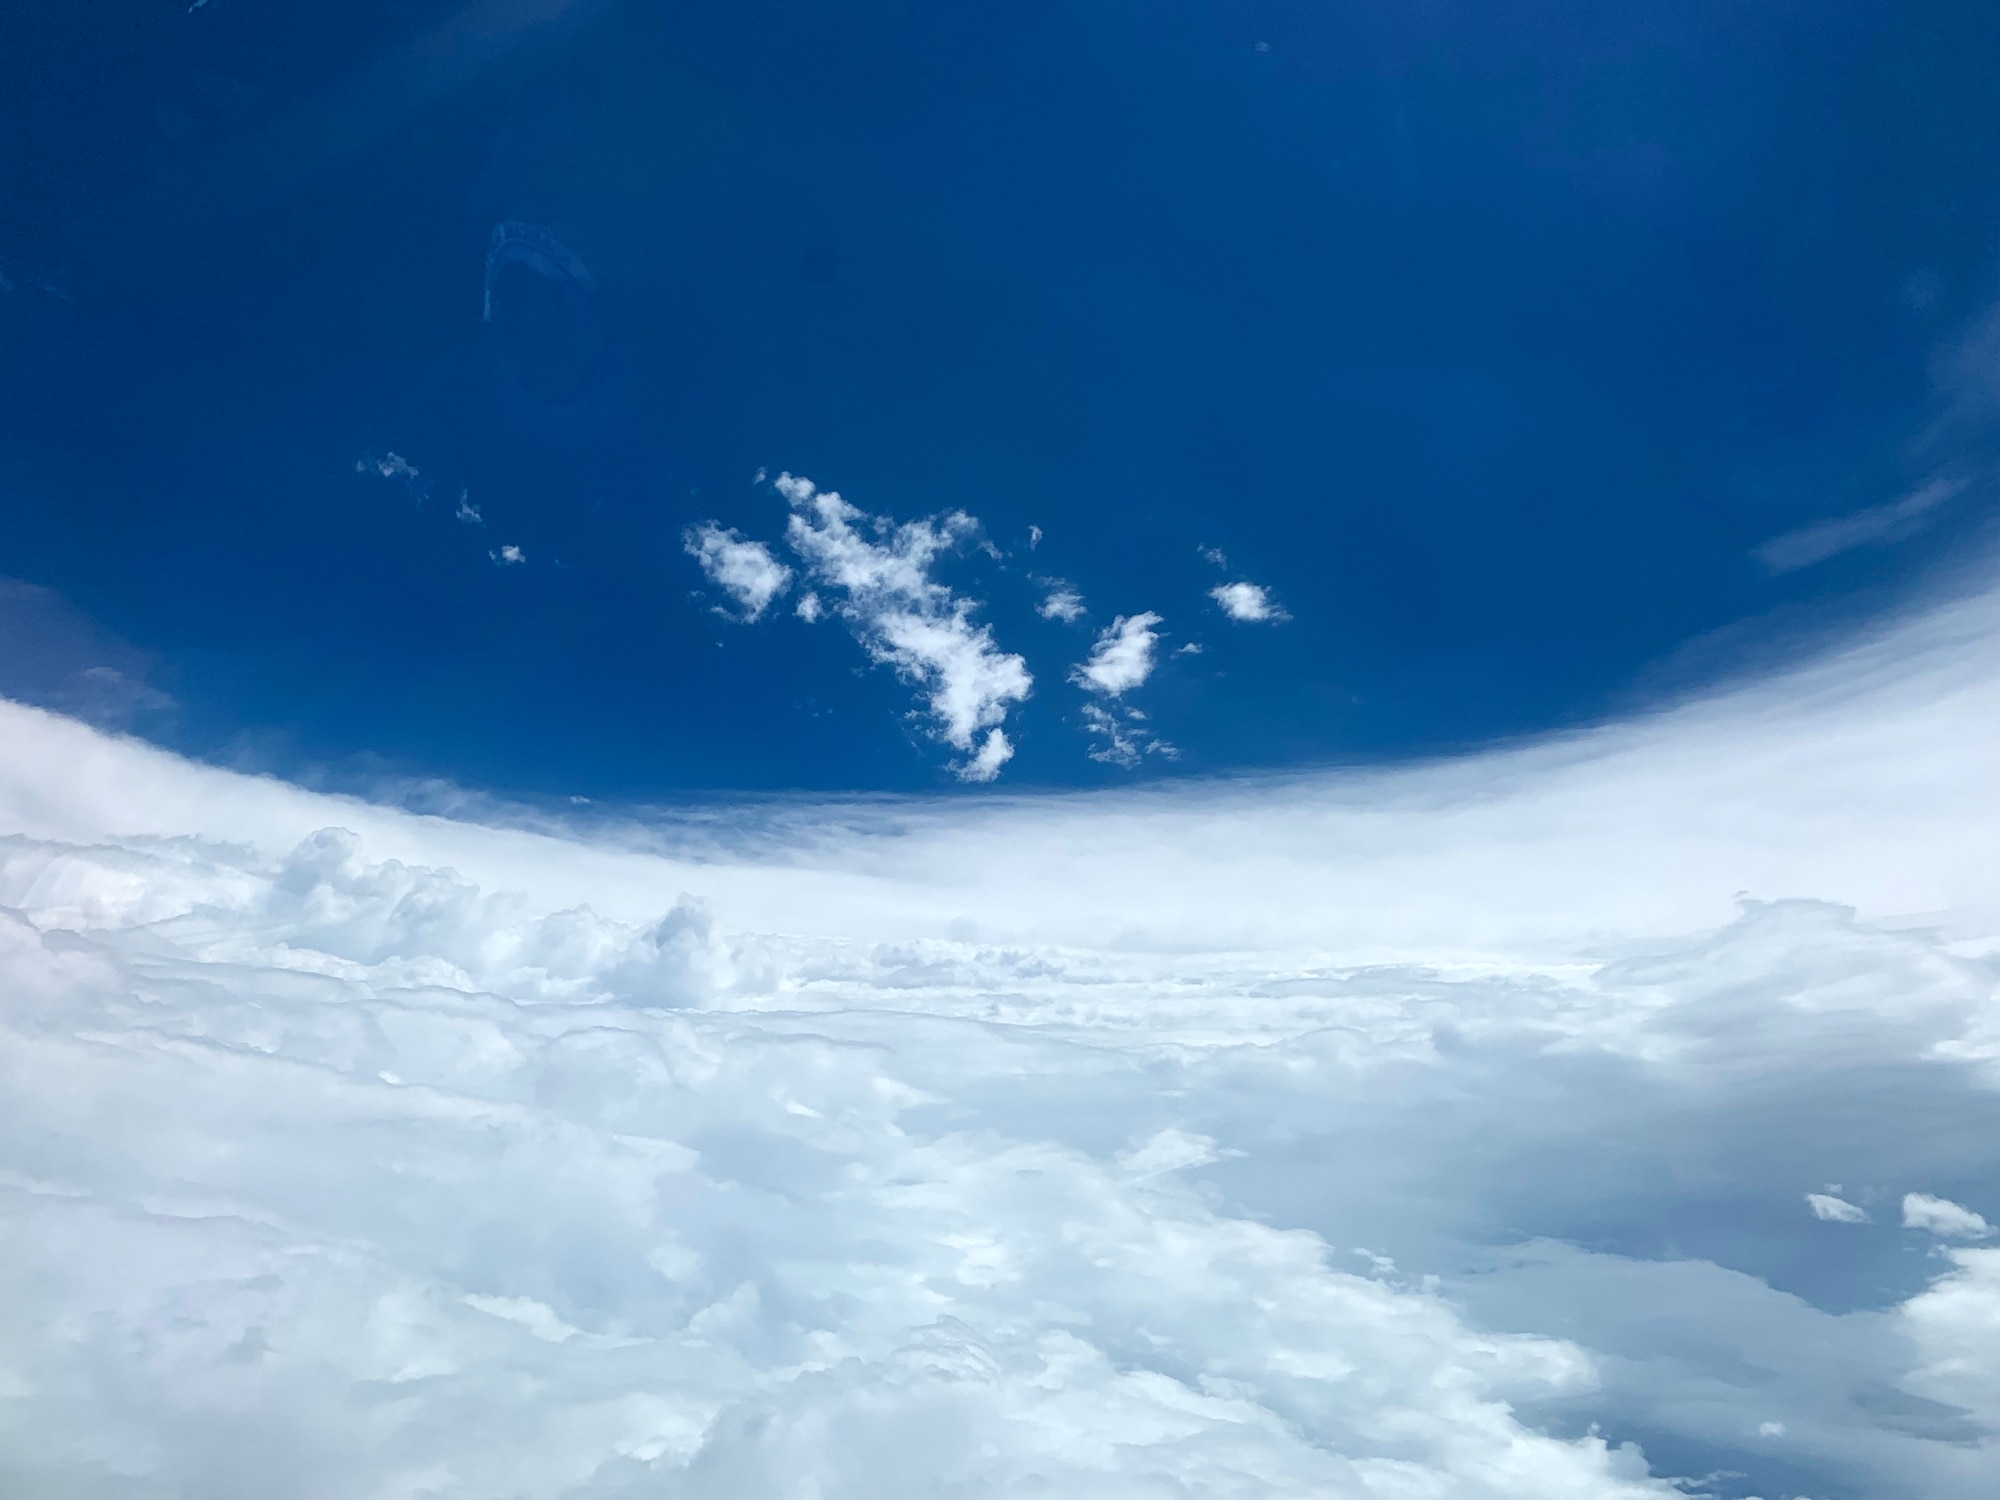 Inside the eye of Hurricane Dorian during a Hurricane Hunters mission Sep. 2, 2019. The 53rd Weather Reconnaissance Squadron, an Air Force Reserve unit located at Keesler Air Force Base, Mississippi., gathered weather information from inside Dorian. The data they gather is used by the National Hurricane Center for their forecasts. (U.S. Air Force photo by U.S. Navy Midshipman First Class Julia Von Fecht)